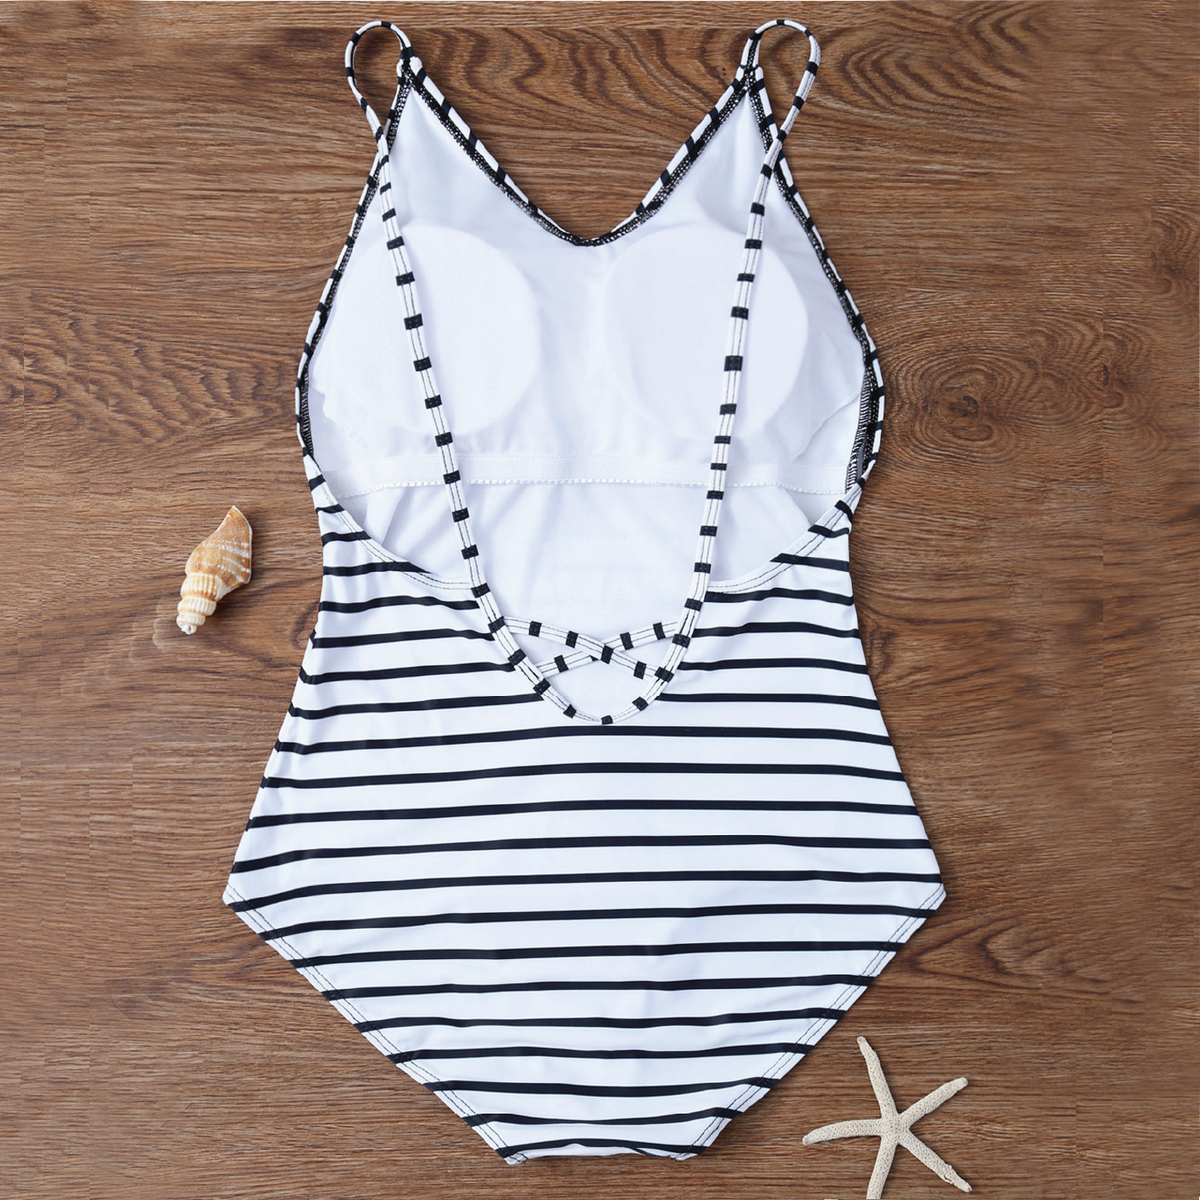 Modest White Stripes Backless One Piece Swimsuit - worthtryit.com